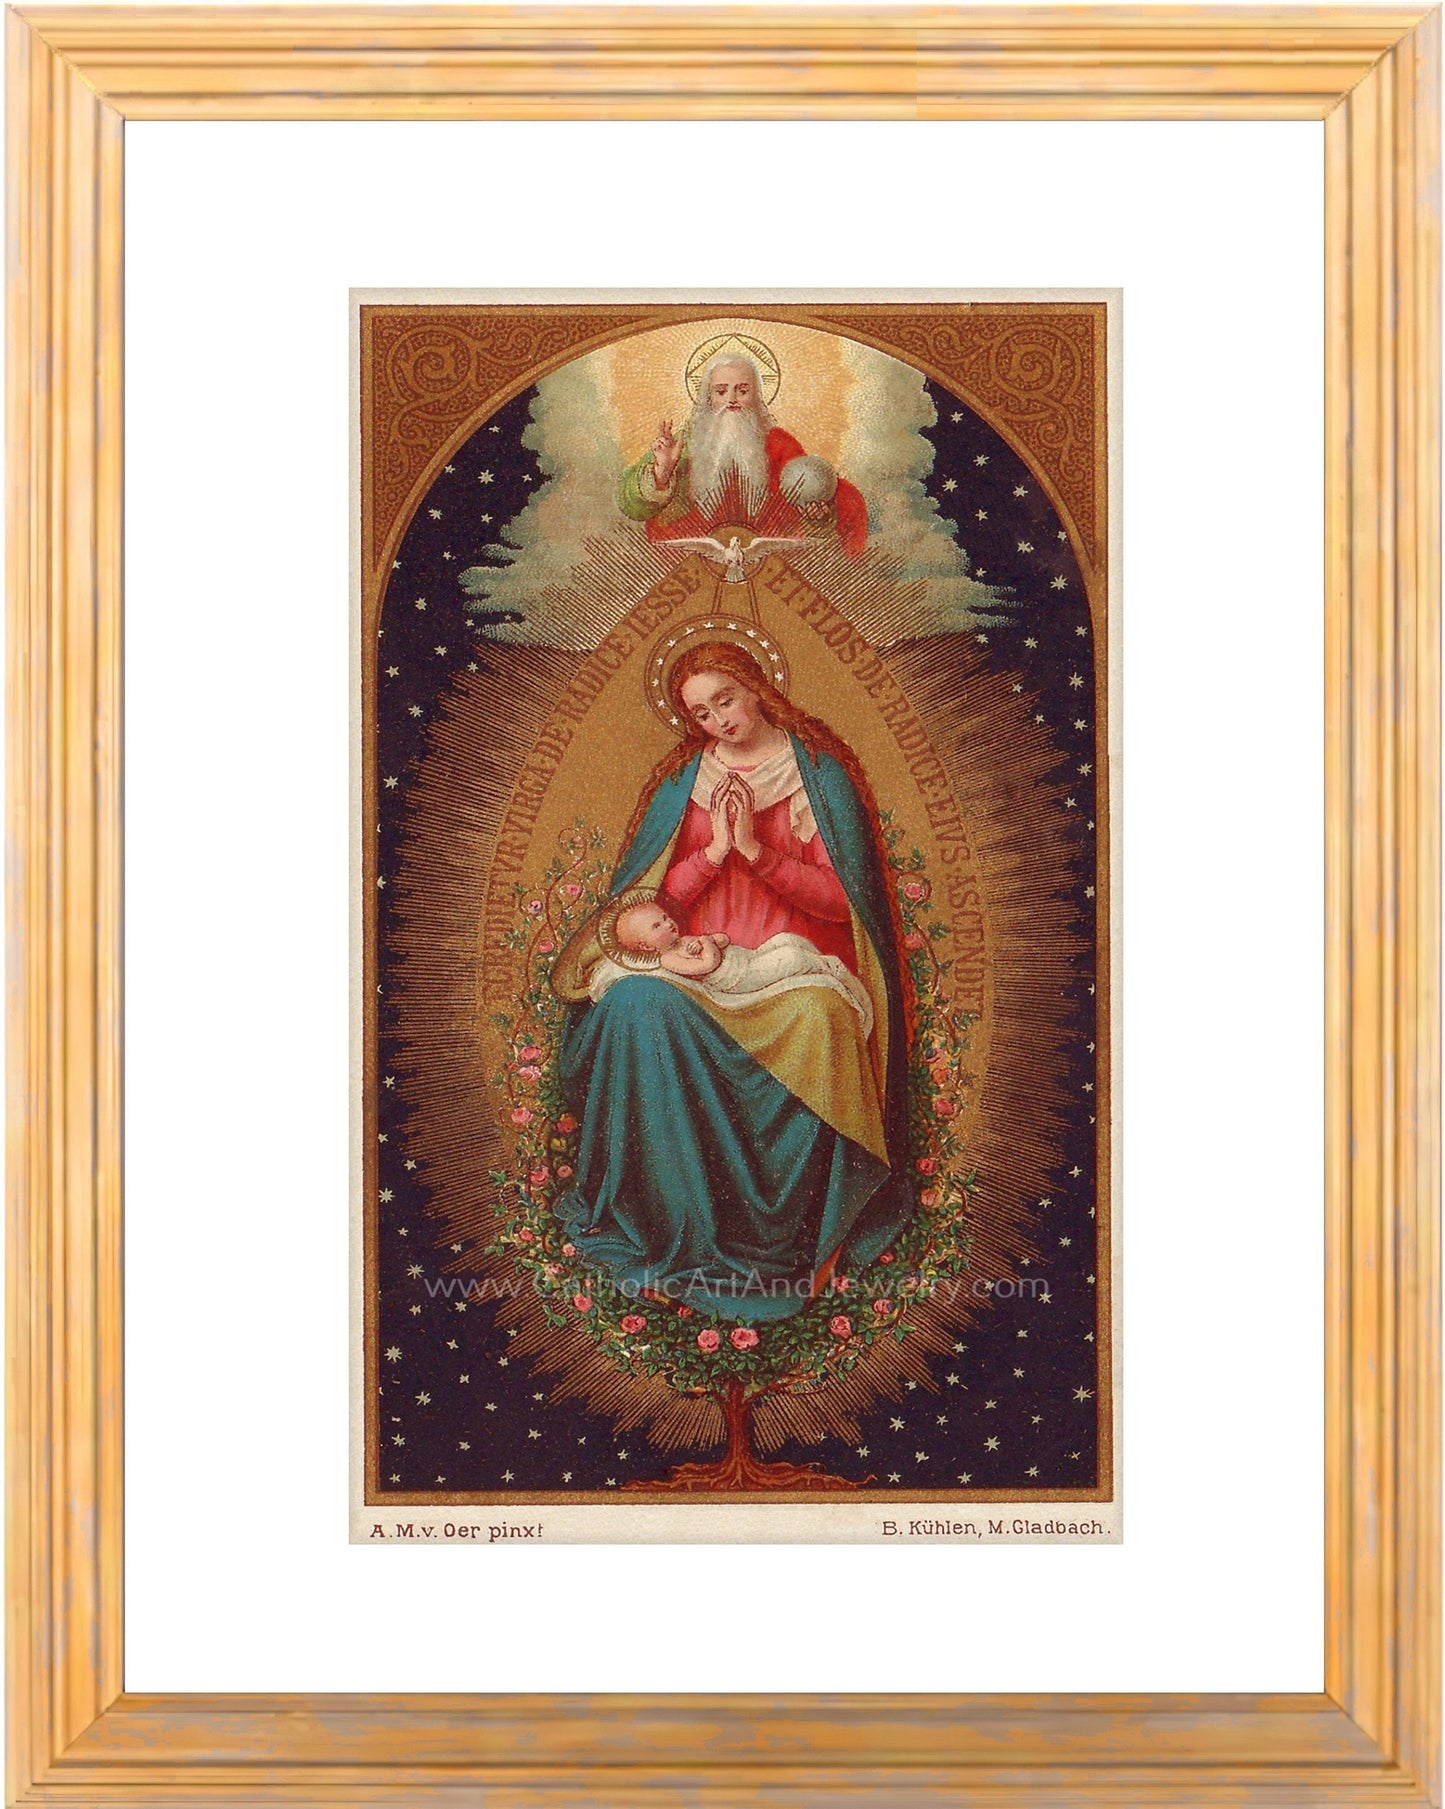 Tree of Jesse with Mary and Jesus – based on a Vintage Holy Card – Catholic Art Print – Madonna and Child